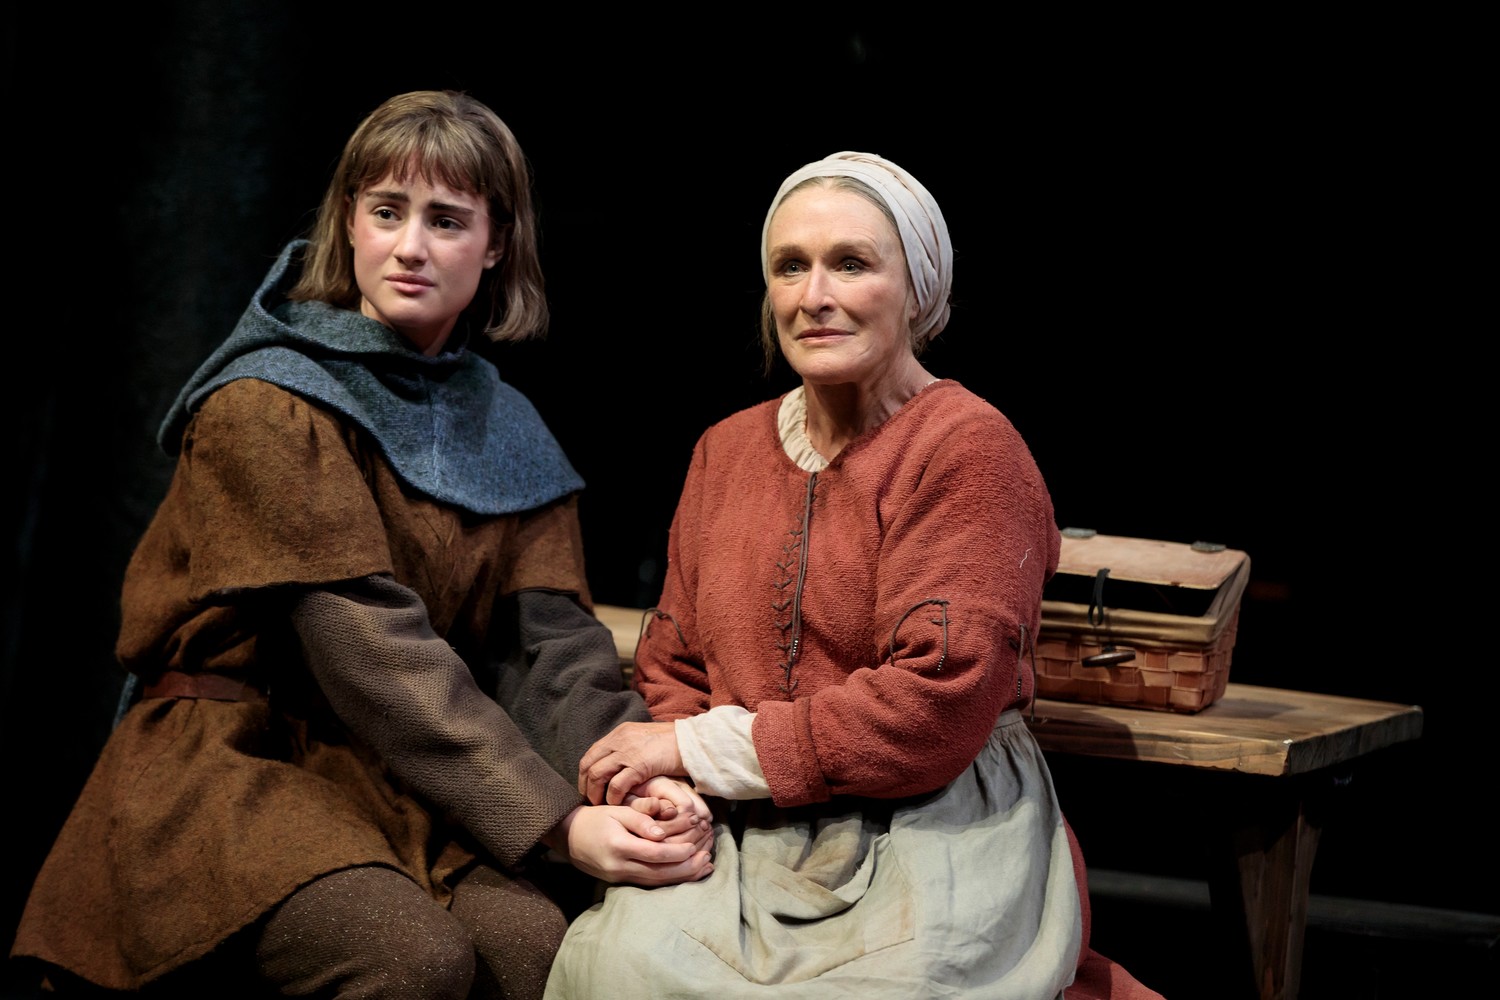 Glenn Close stars as Joan of Arc’s mother, a sensible, hard-working, God-fearing peasant woman, in the new play “Mother of the Maid.” The epic is tale told through an unexpected new perspective.